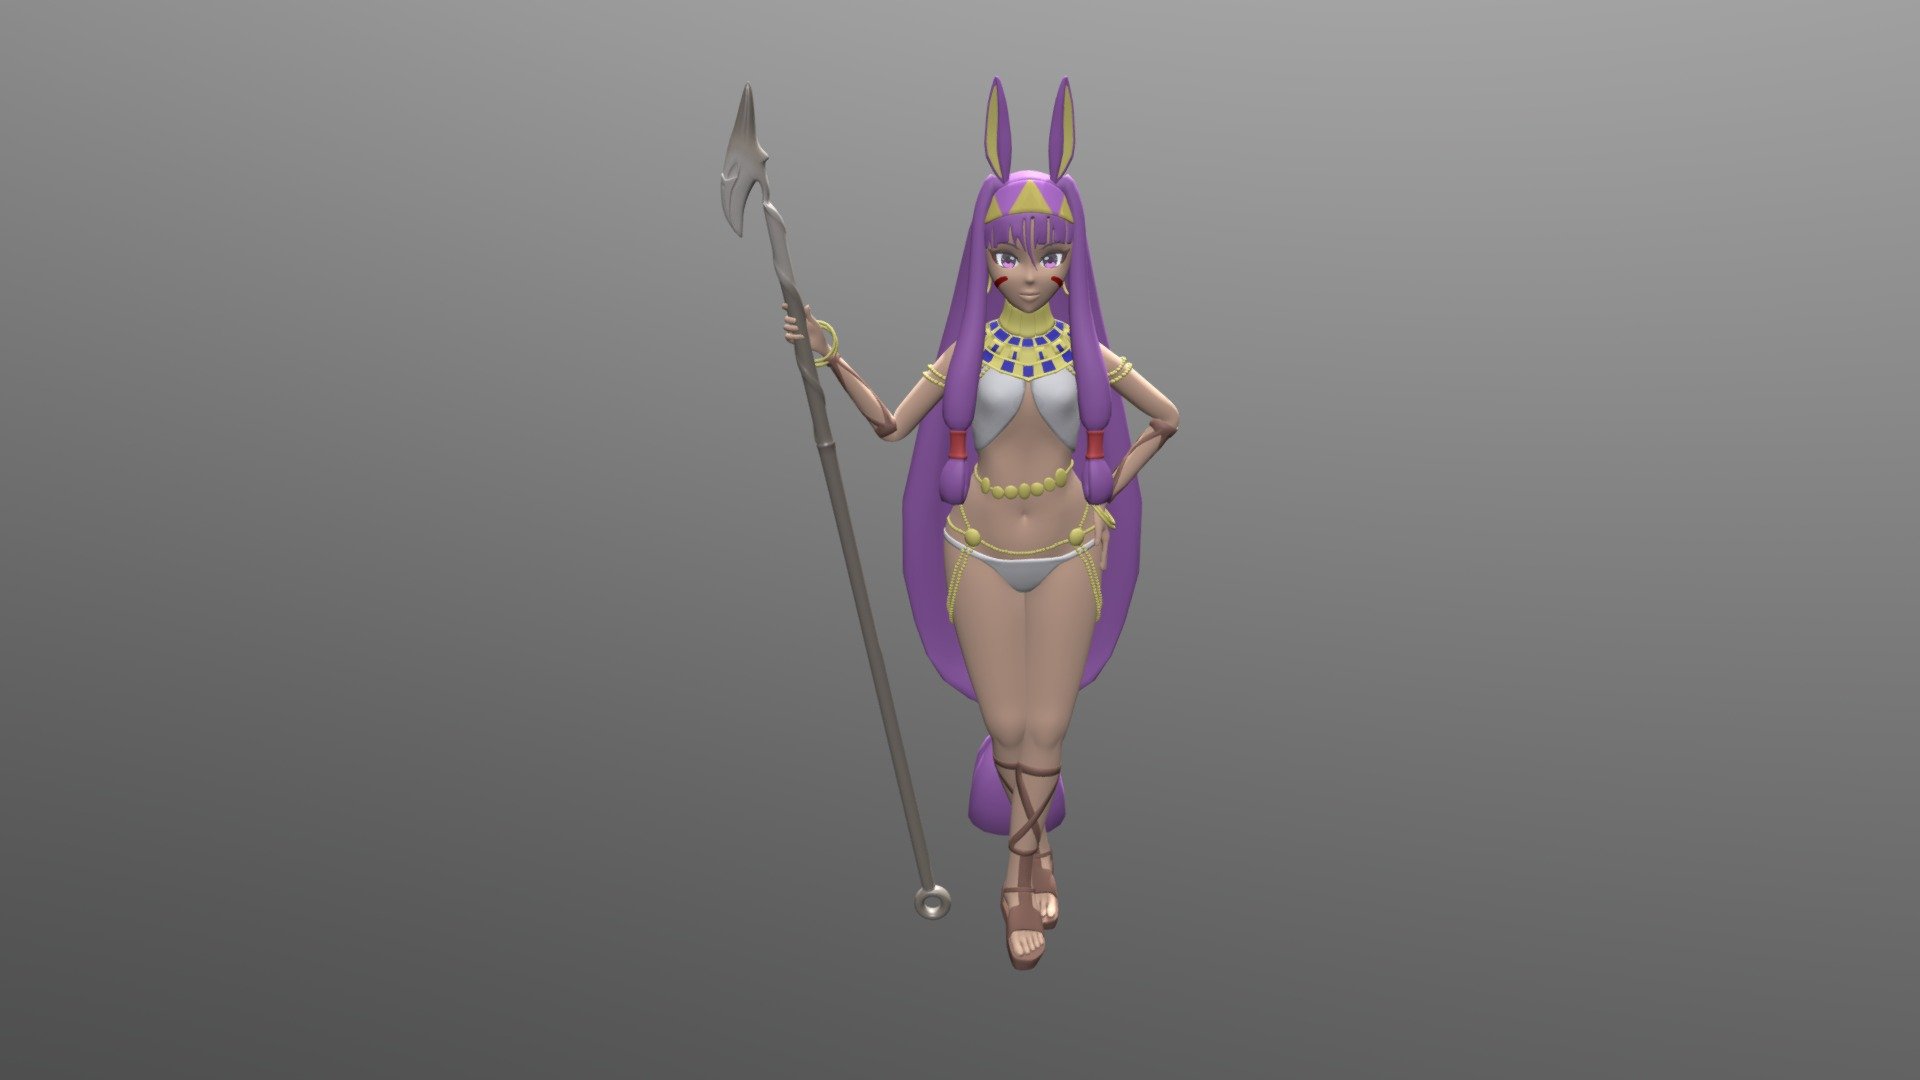 Nitocris from Fate grand order modeled in blender of the course of a few months. Some things went a bit better than  last time, but weight painting still gives me great trouble and I do not understand texturing as much as I would like. Reference used mostly https://imgur.com/a/wQO5qft - Nitocris (Fate Grand Order) - 3D model by MofuMerchant (@HentaiBoi) 3d model